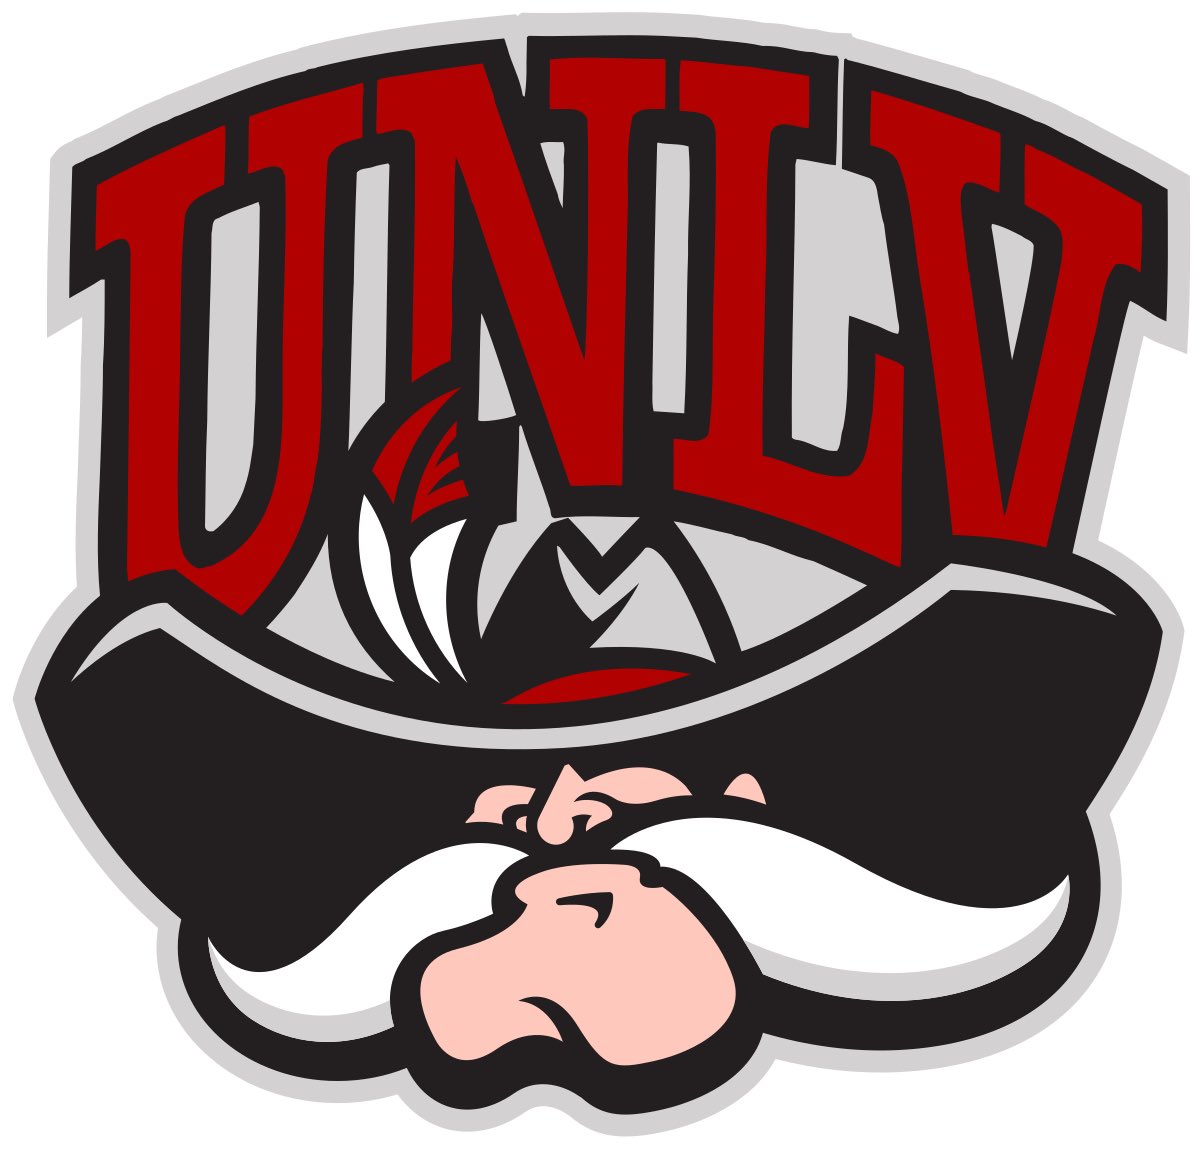 Glad to have @unlvfootball stop by to see our boys today!! #DPP #FindAWay recruiting is about relationships.